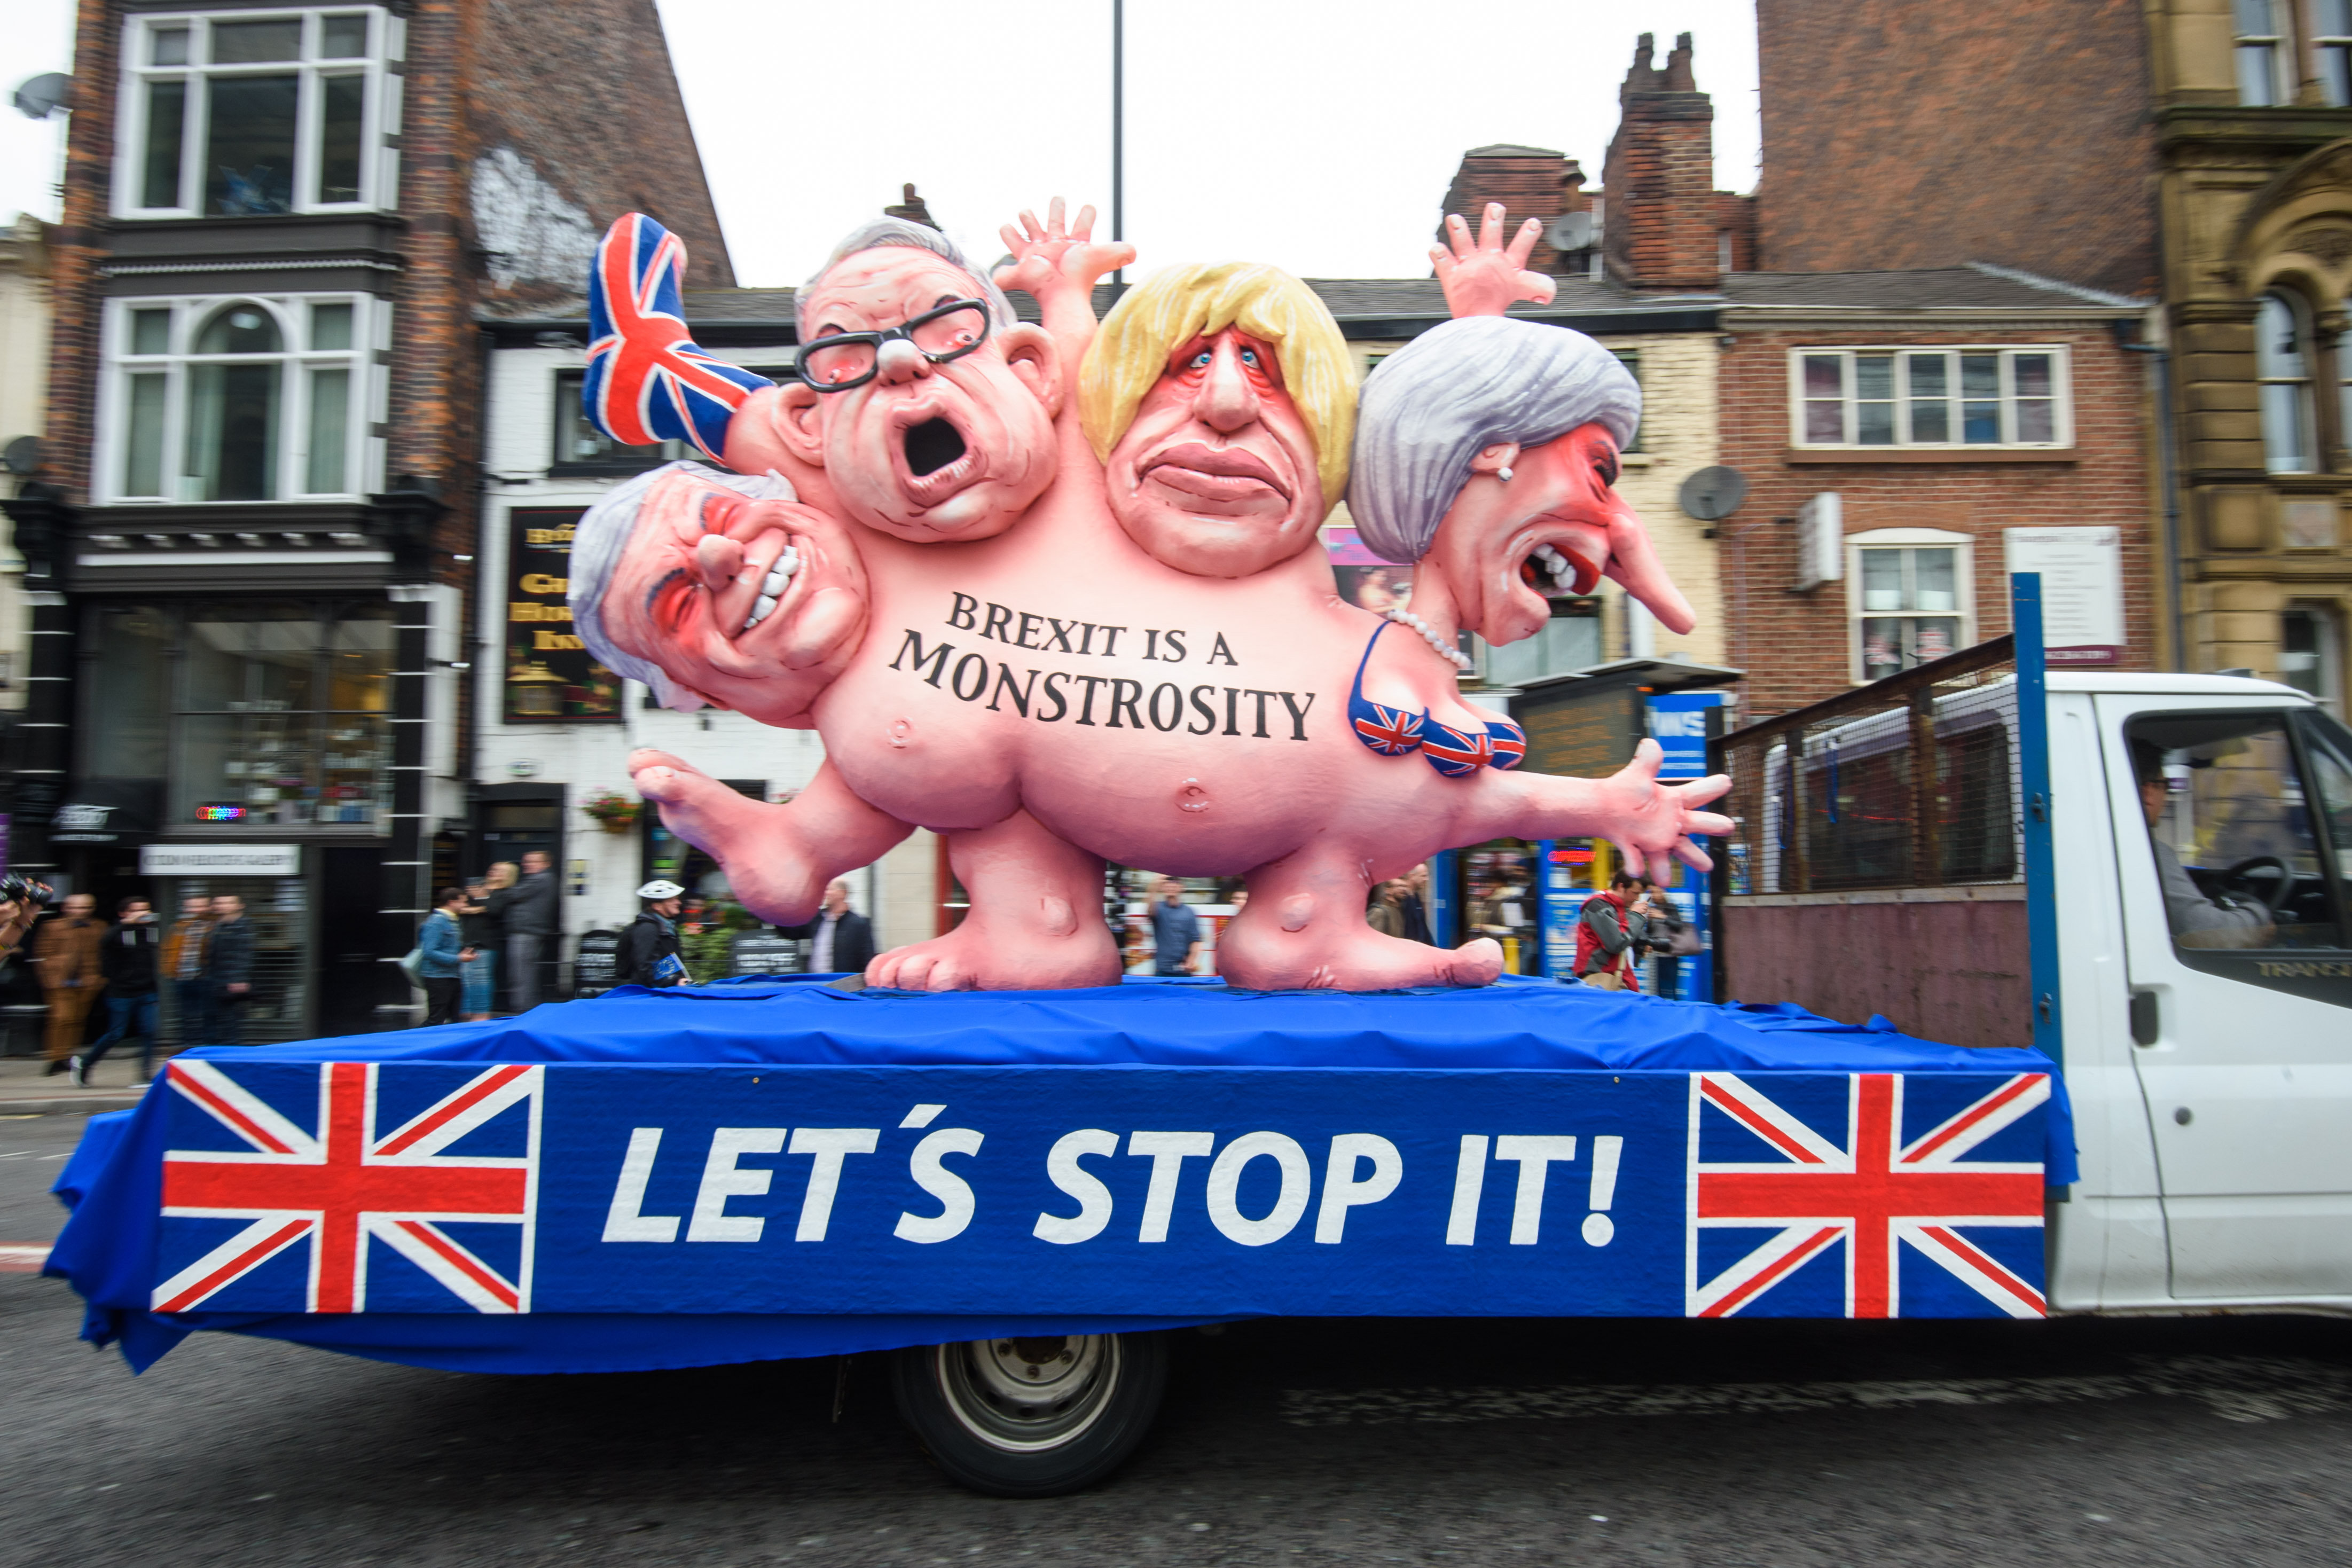 An anti-Brexit float in a Manchester protest